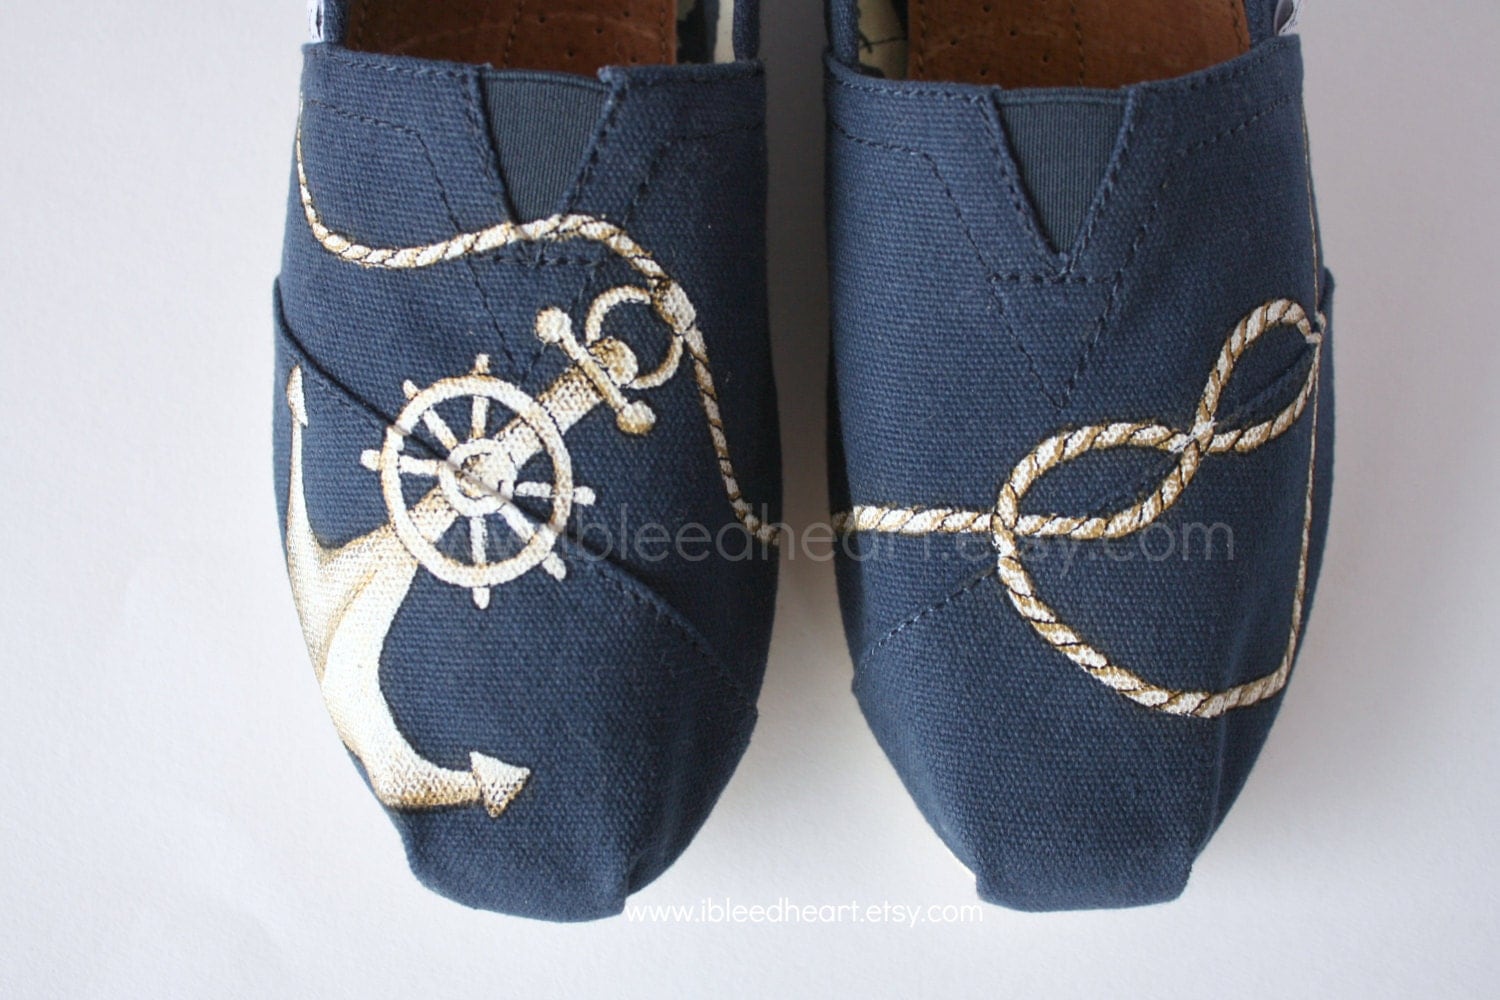 Custom Painted TOMS Shoes Navy Anchor and Rope by ibleedheART